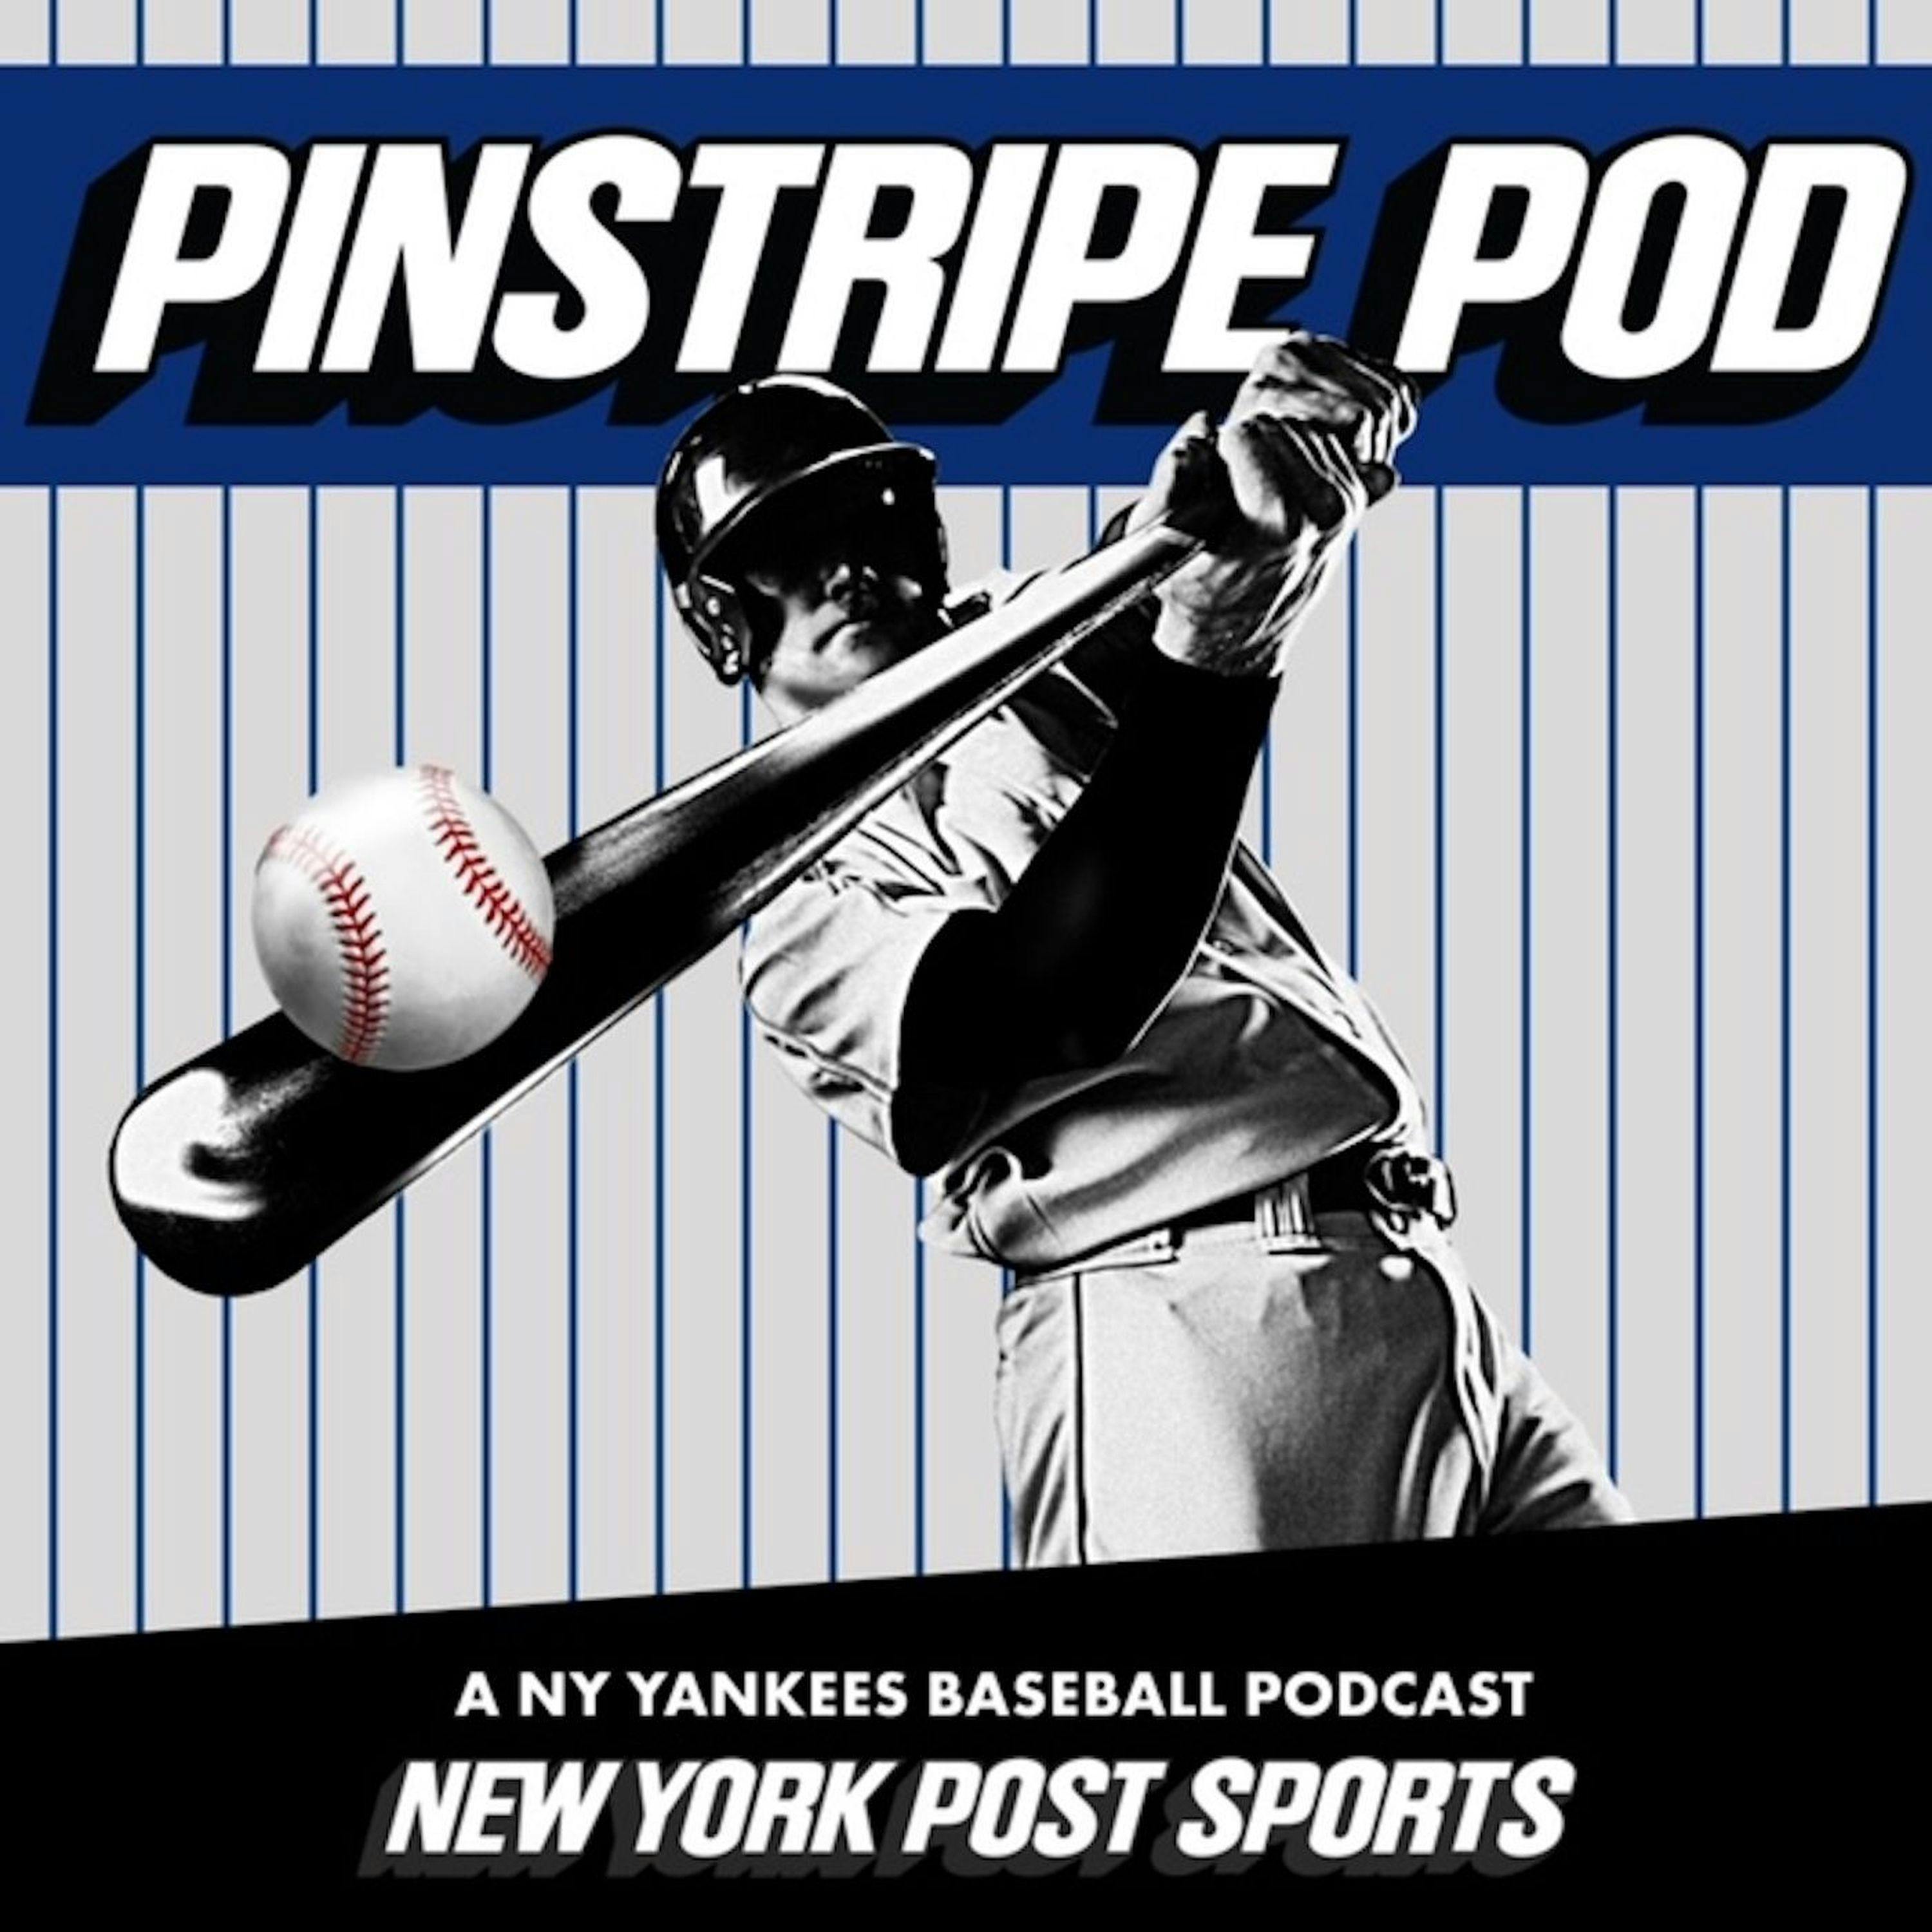 Episode 33: Yankees-Rays ALDS Preview feat. Jim Leyritz